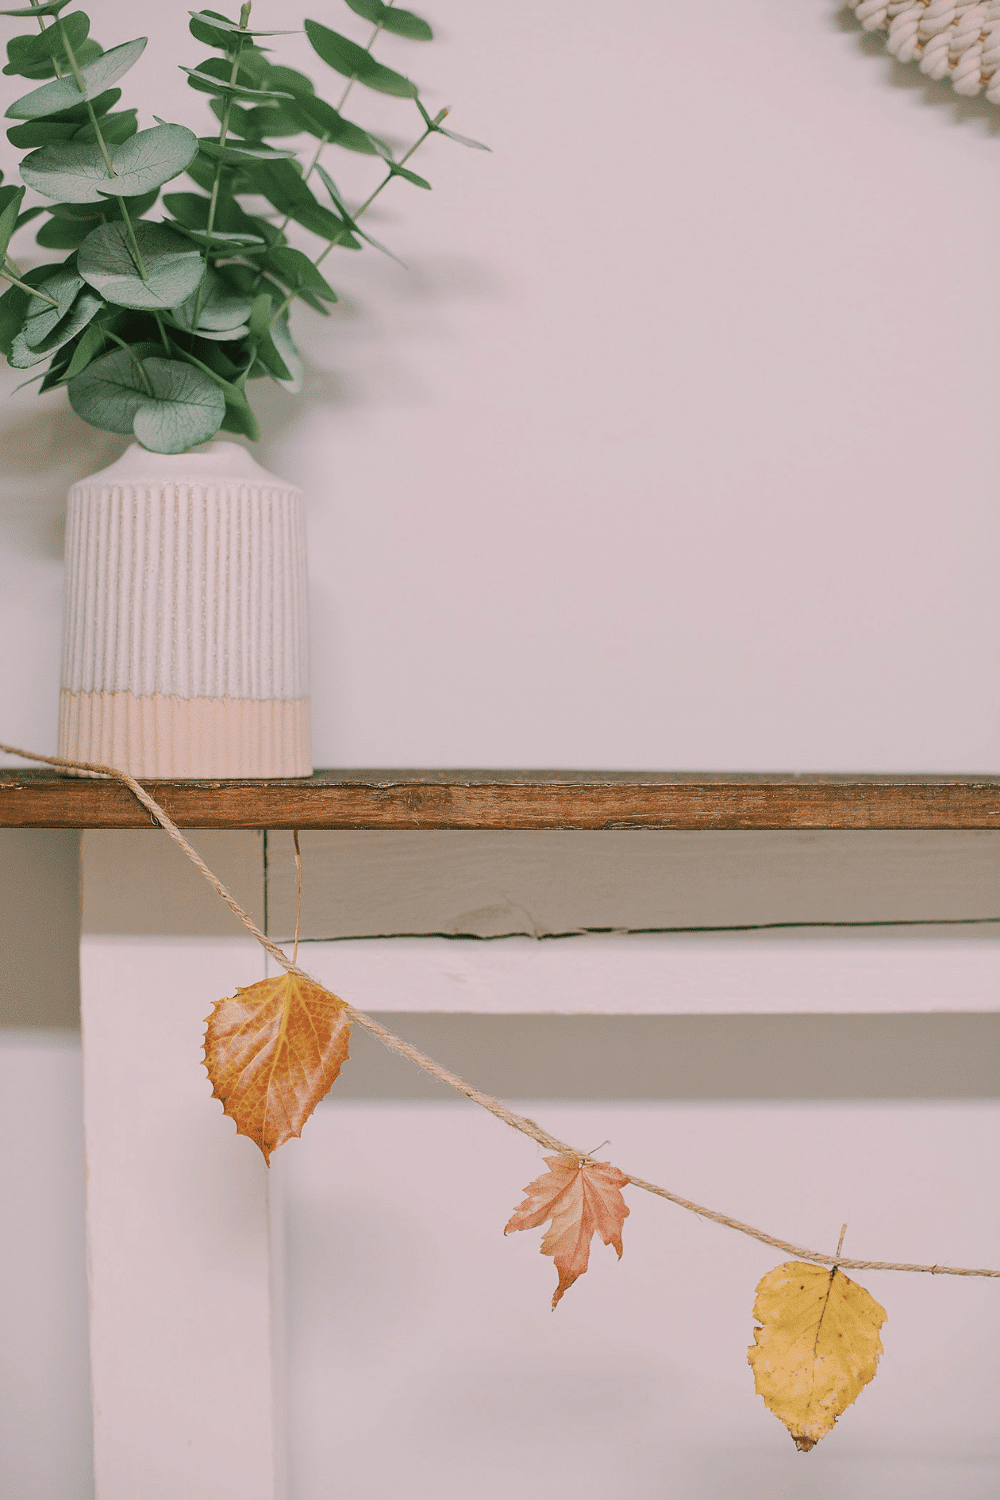 How to Make a Beeswax Leaf Garland